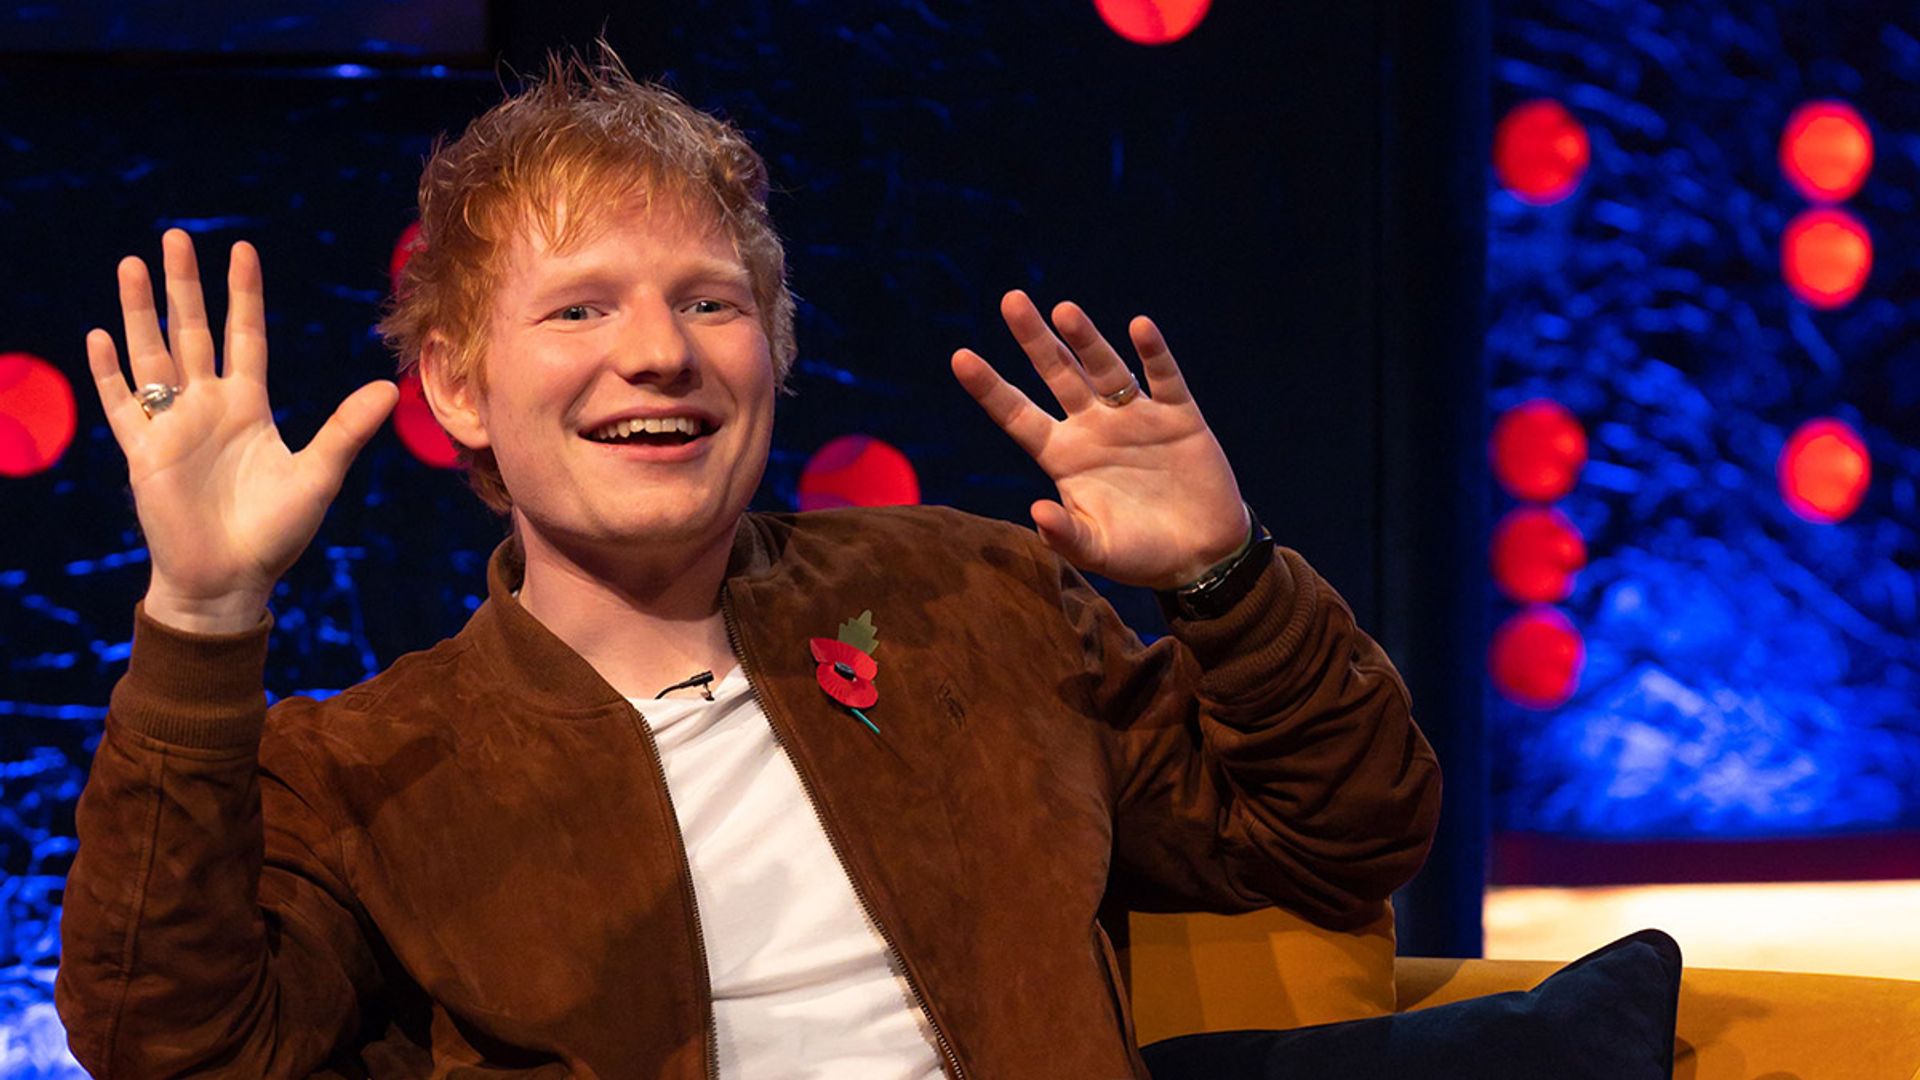 Ed Sheeran makes rare and candid comment about parenthood - and many will relate